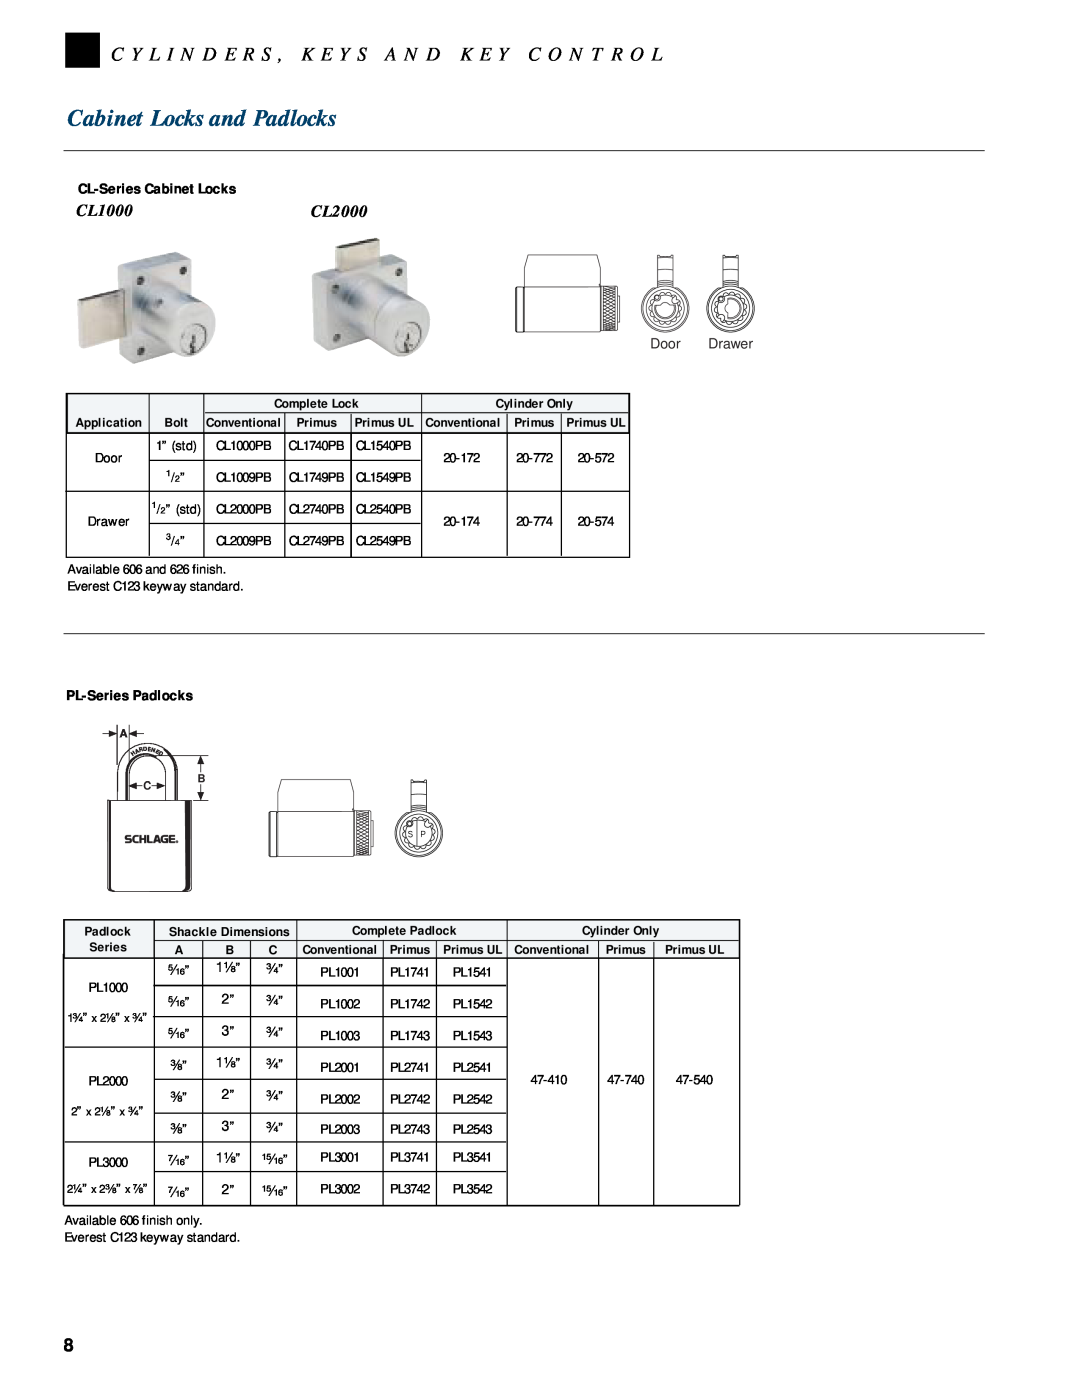 Schlage CYLINDERS manual Cabinet Locks and Padlocks, CL1000CL2000, CL-SeriesCabinet Locks, PL-SeriesPadlocks 